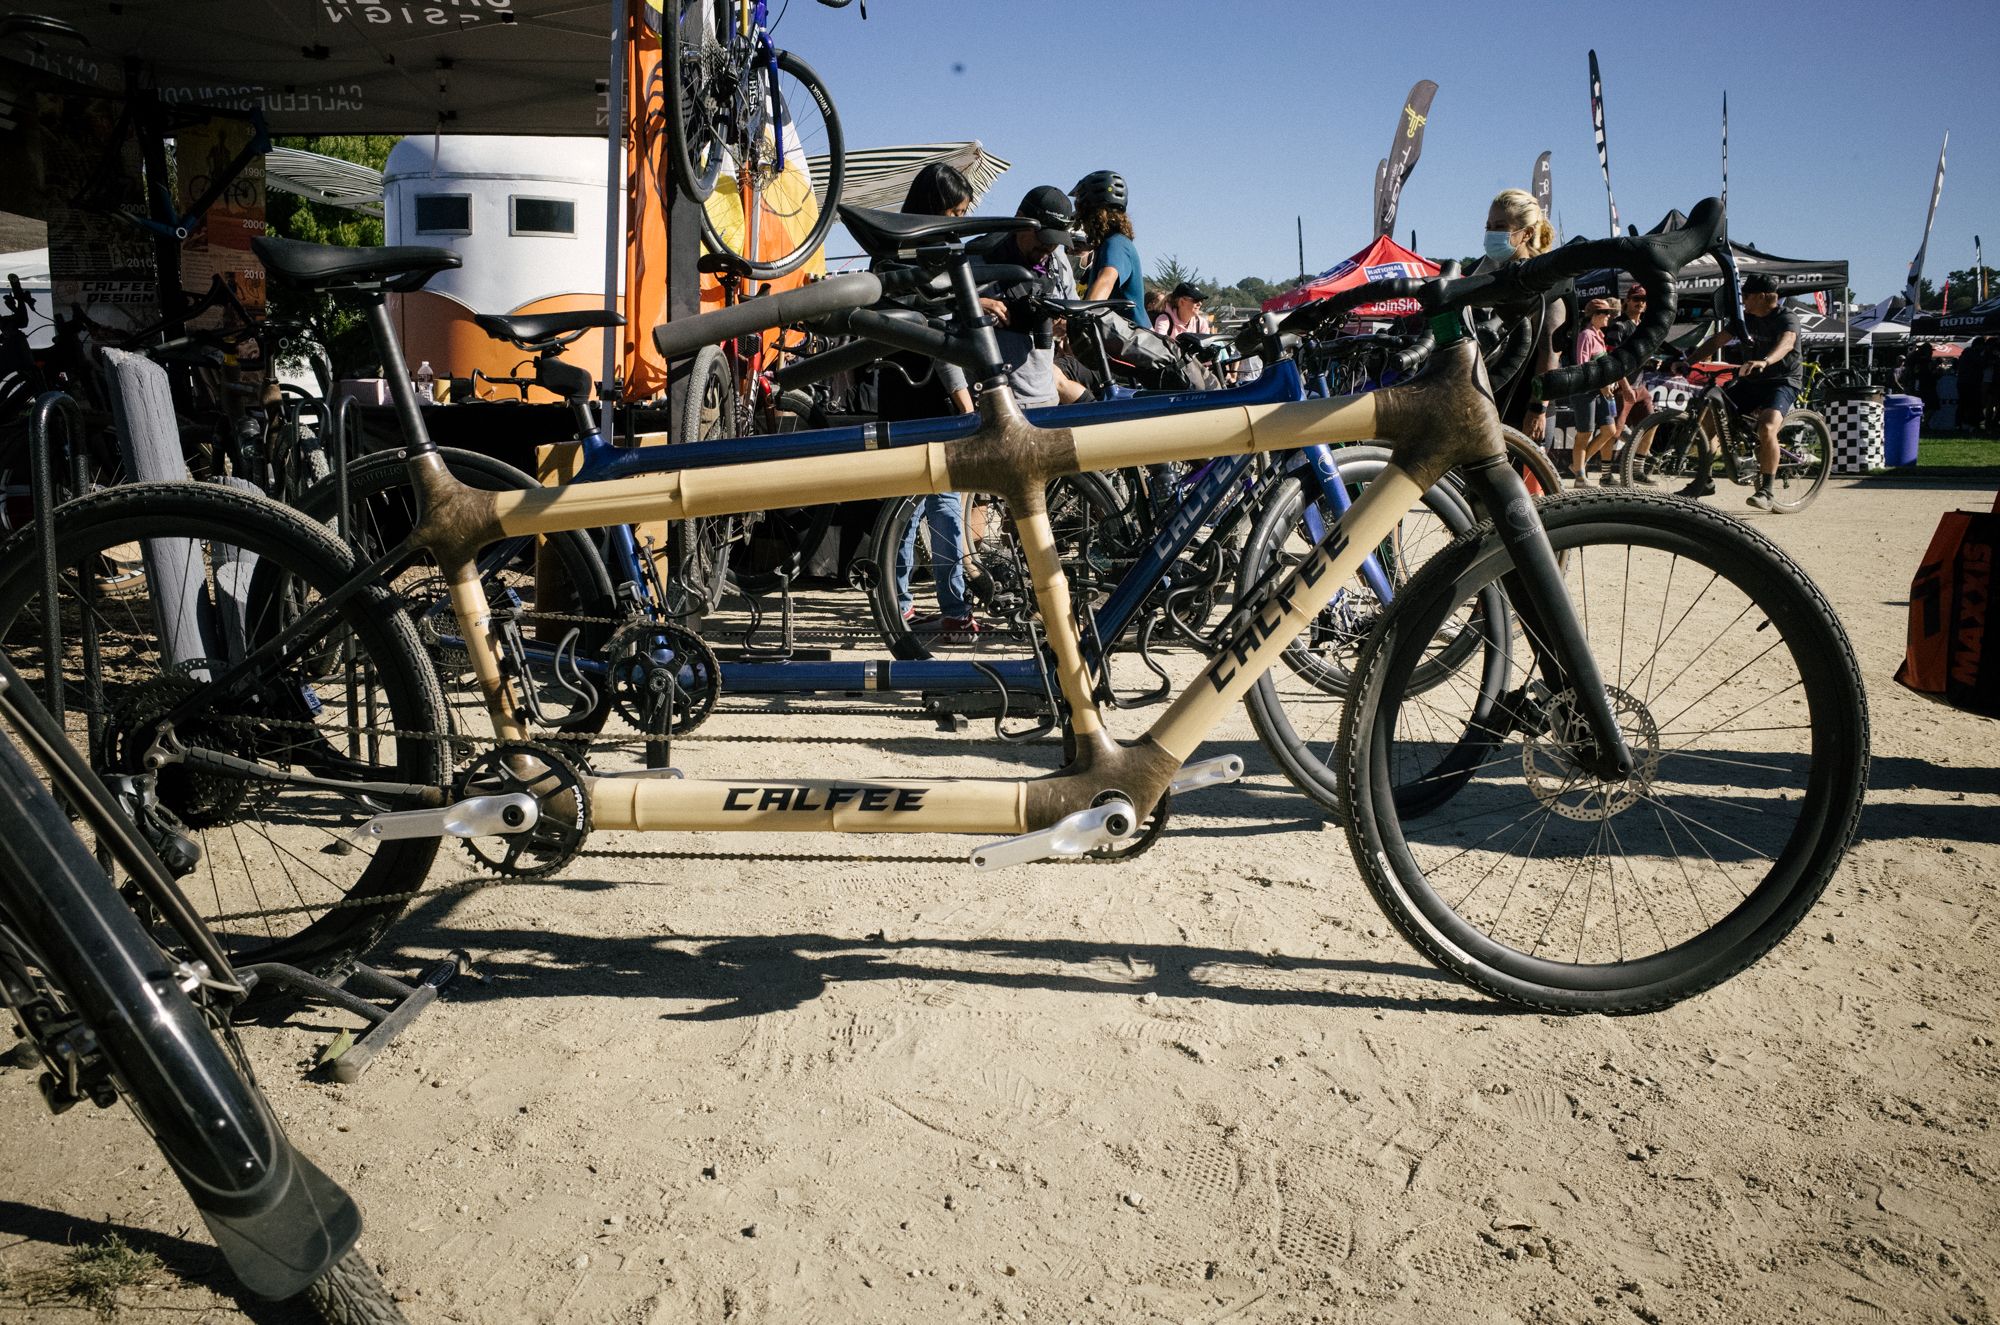 The Booomer Yonso was right next to this bamboo tandem from Calfee, which seemed appropriate. 